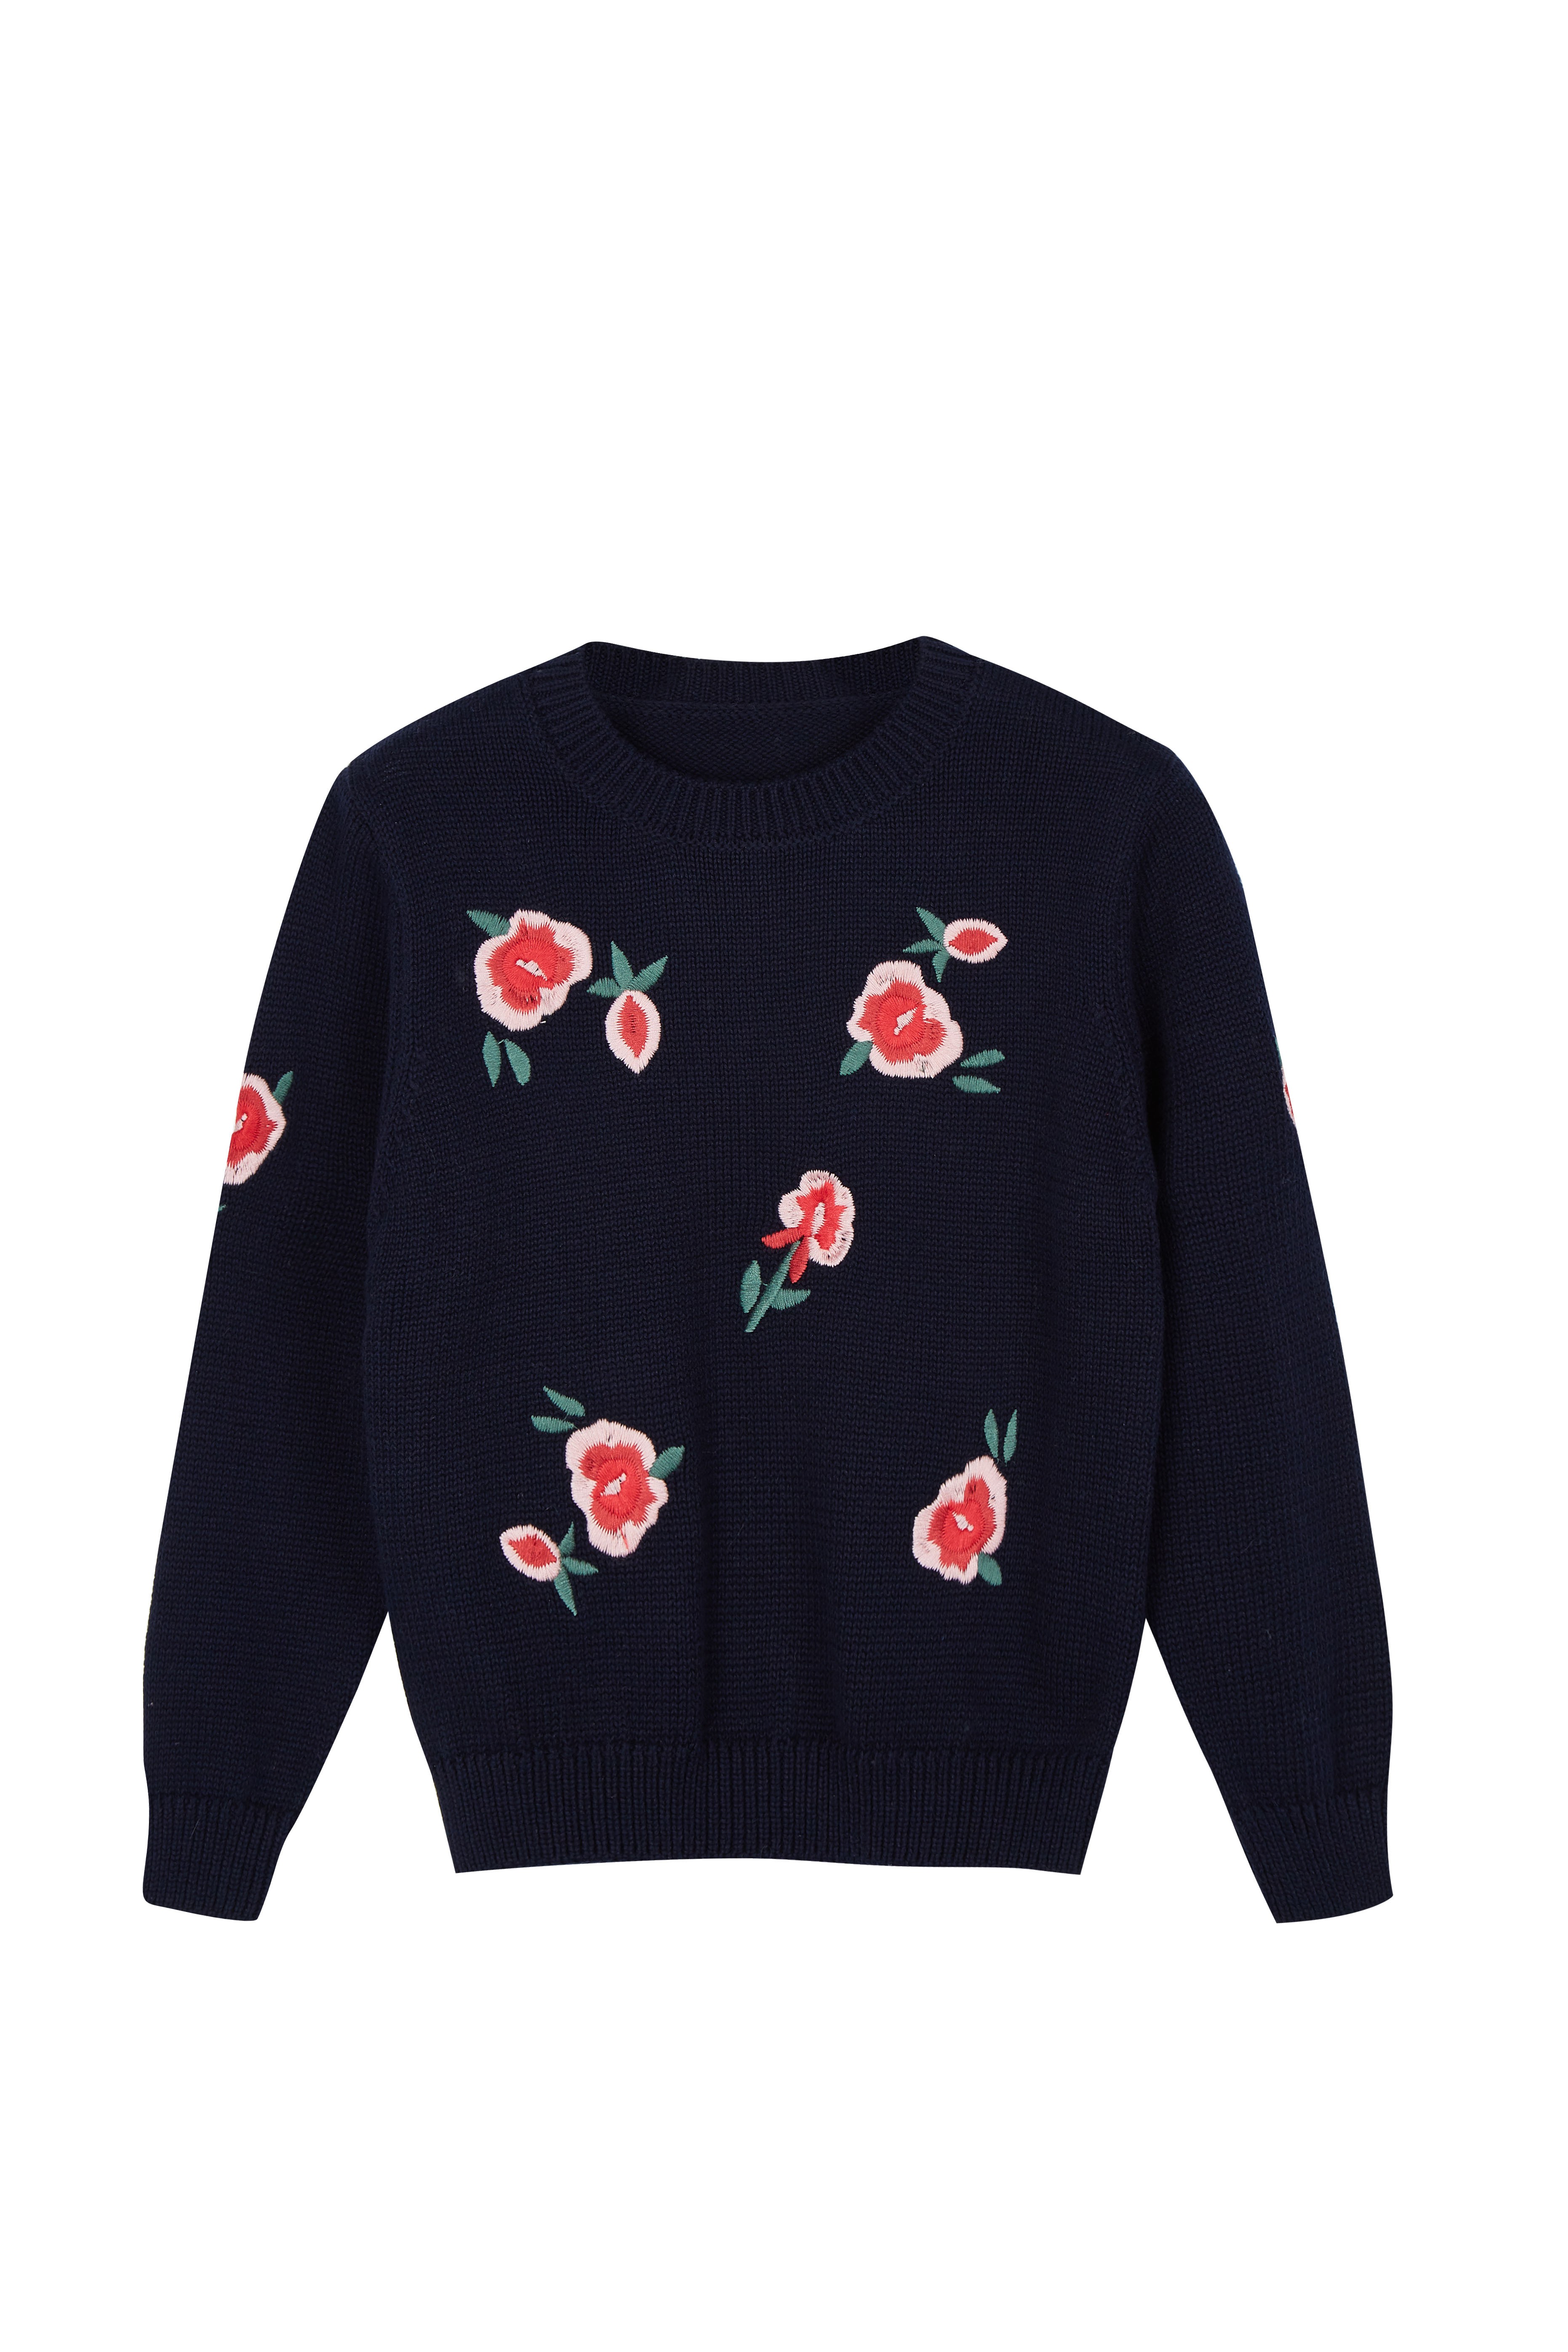 Girl's Fashion Embroidery flowers Knitted Long Sleeve Pullover Sweater